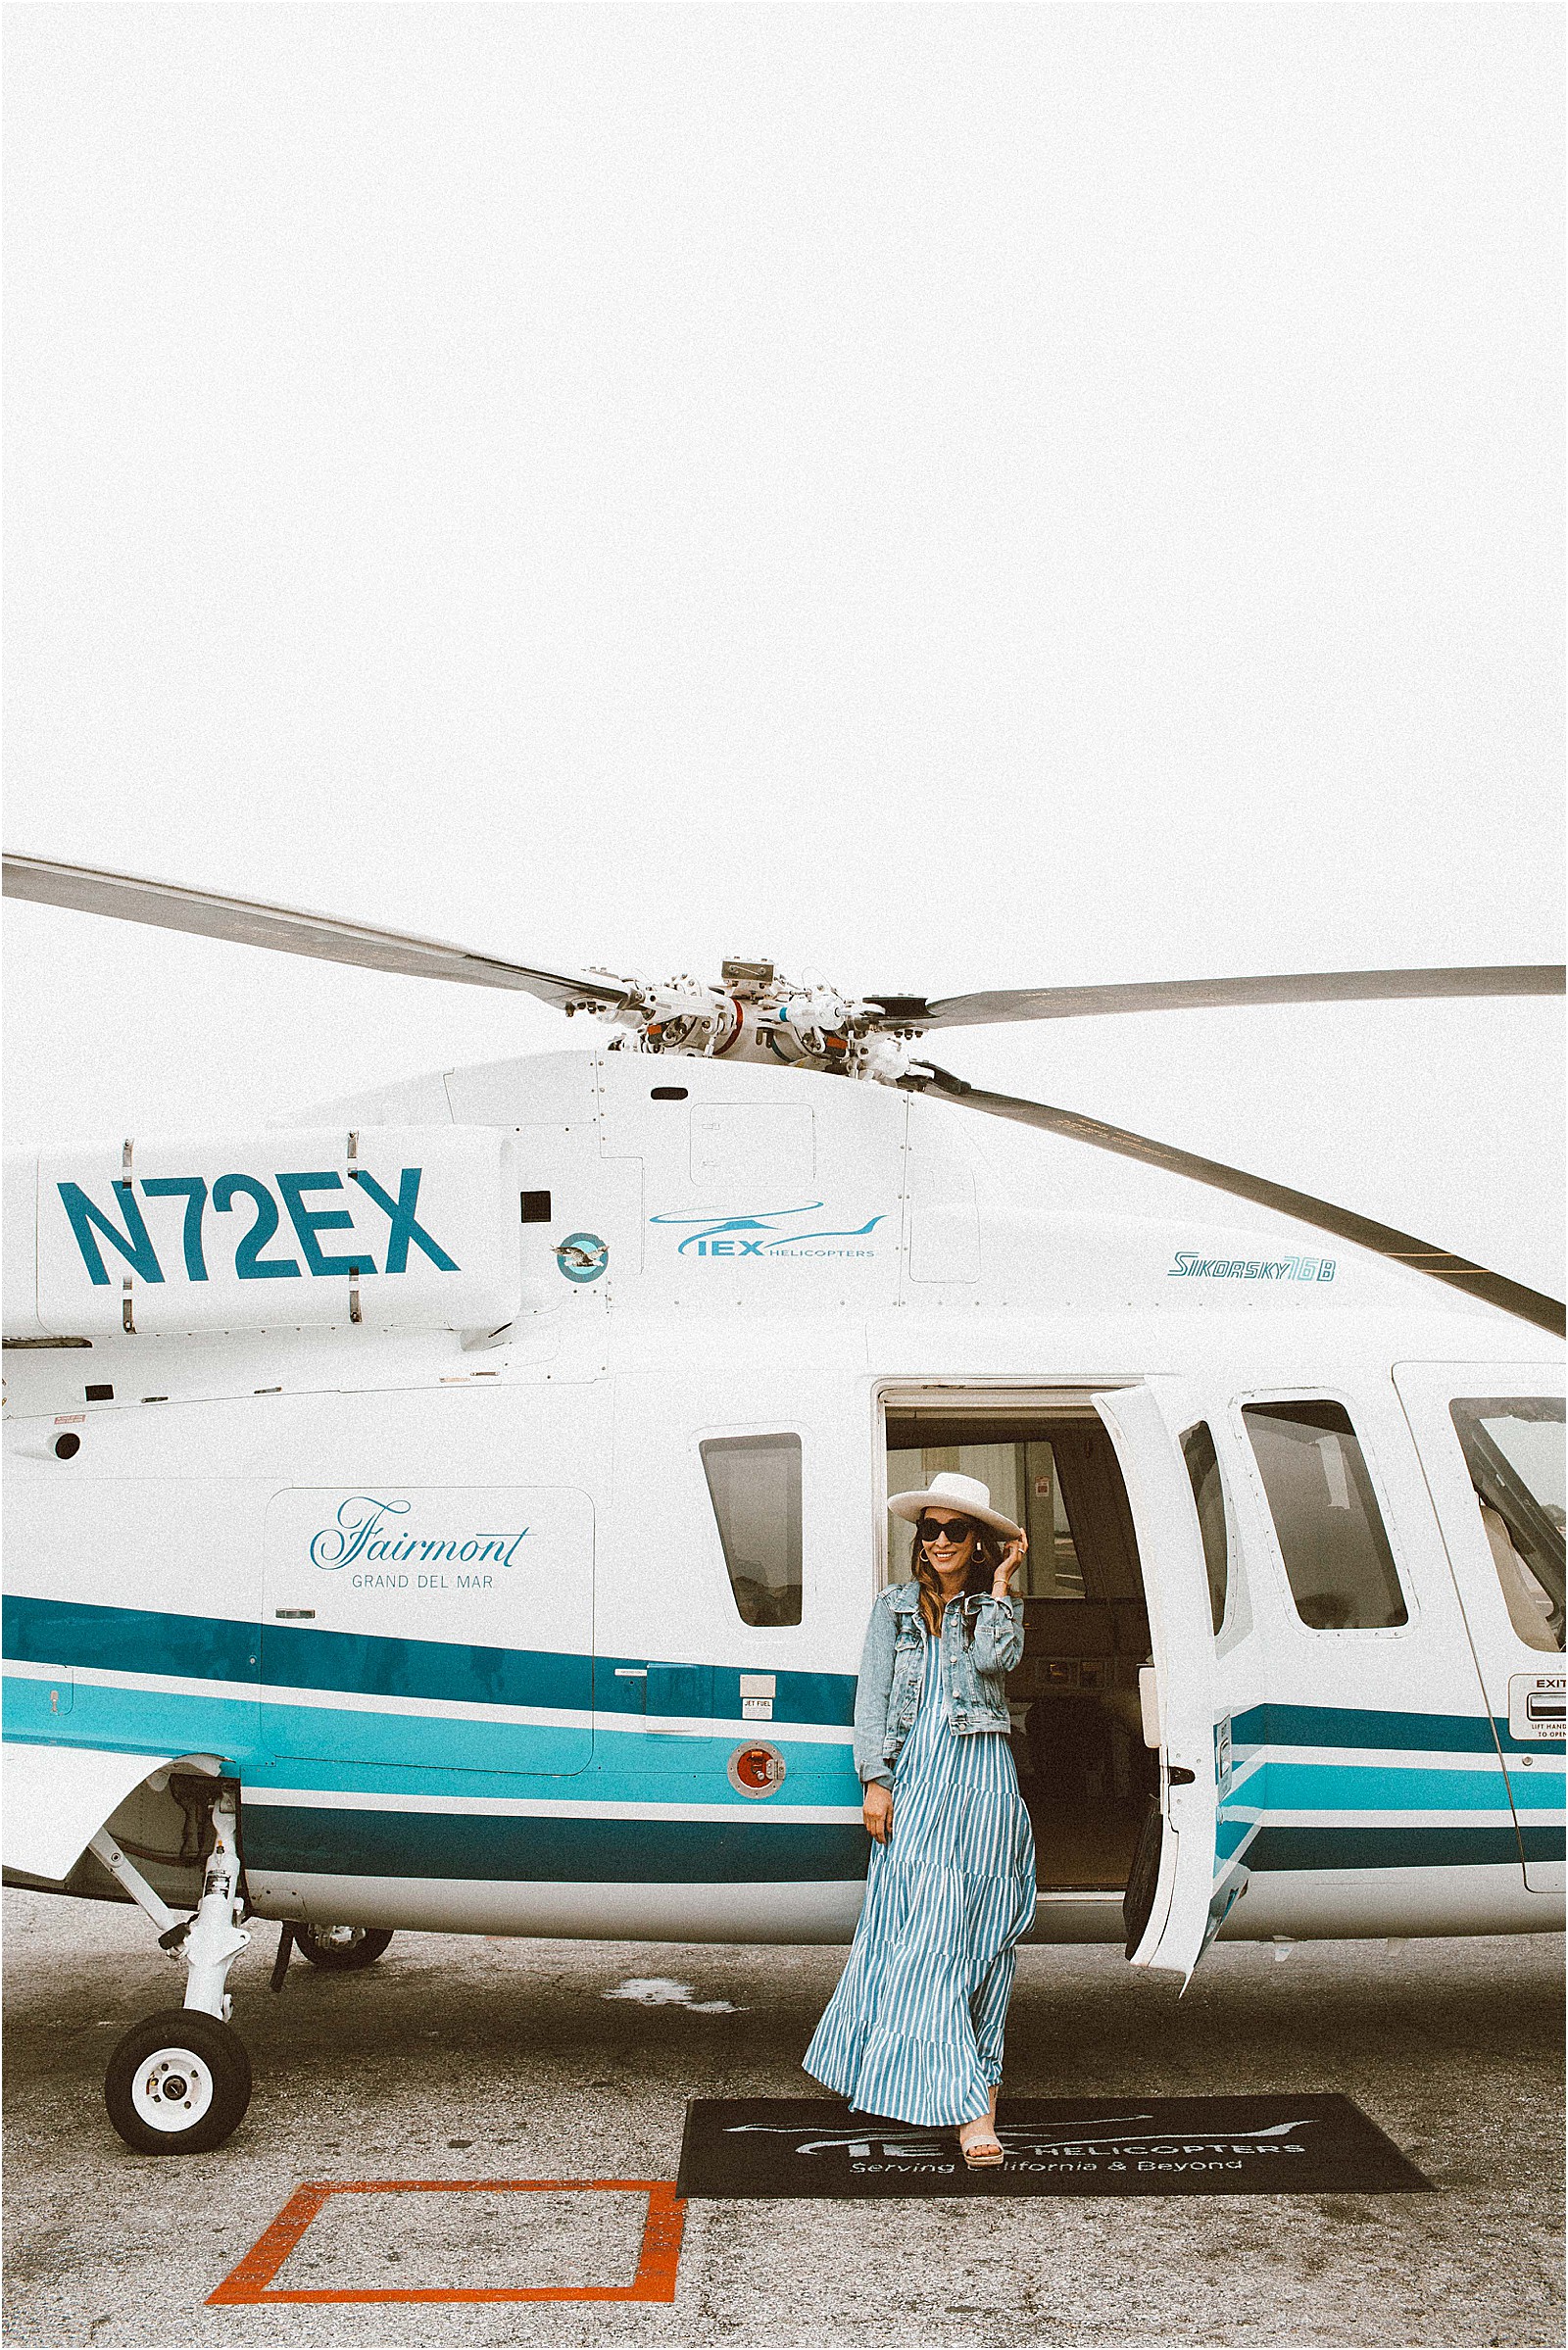 IEX Helicopter to Fairmont Grand Del Mar